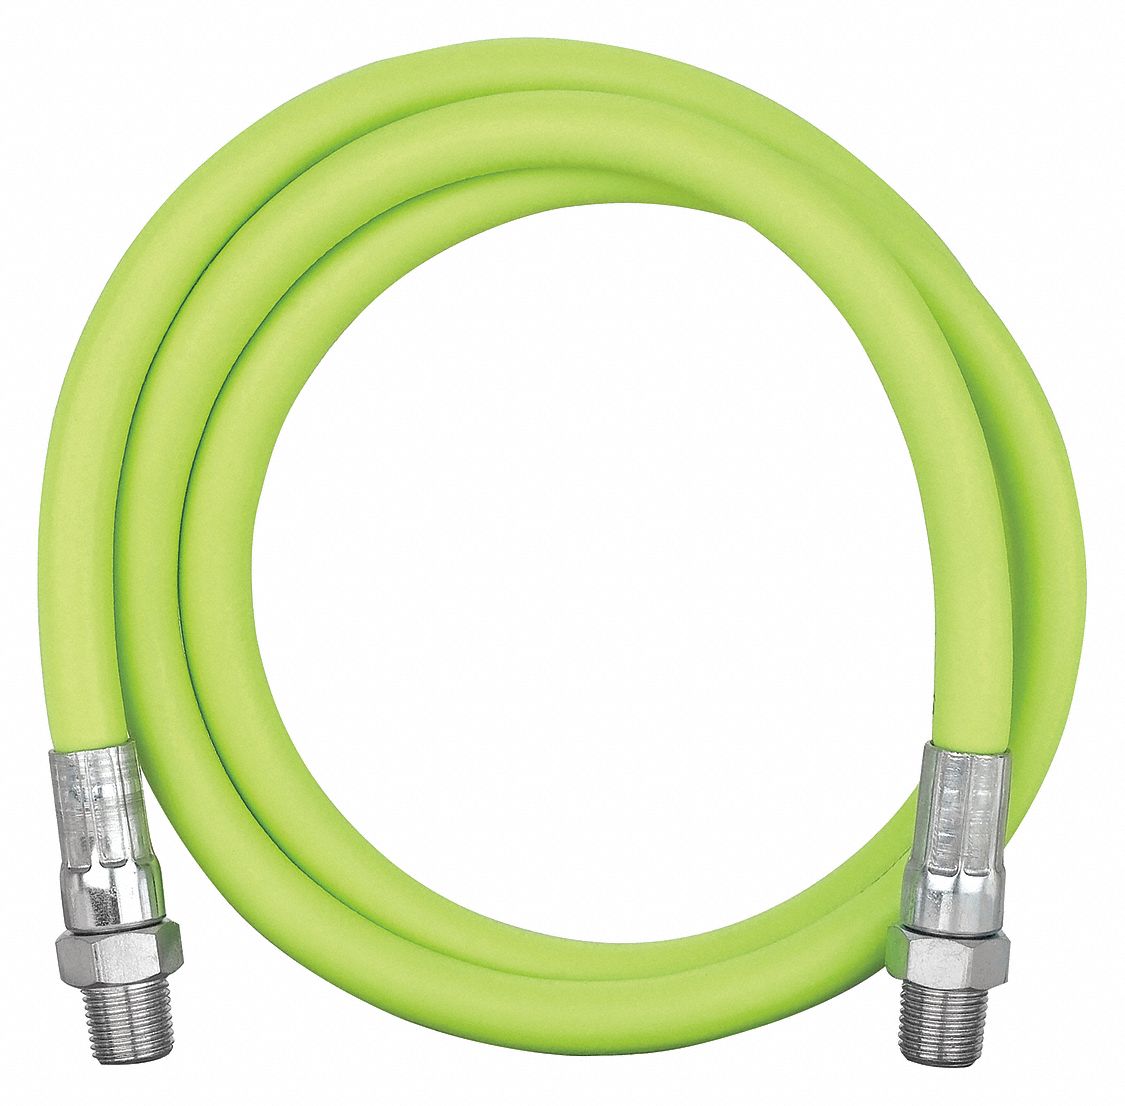 Hose Extension 36": 36 in L, For Use With Manual or Battery Operated Grease Guns